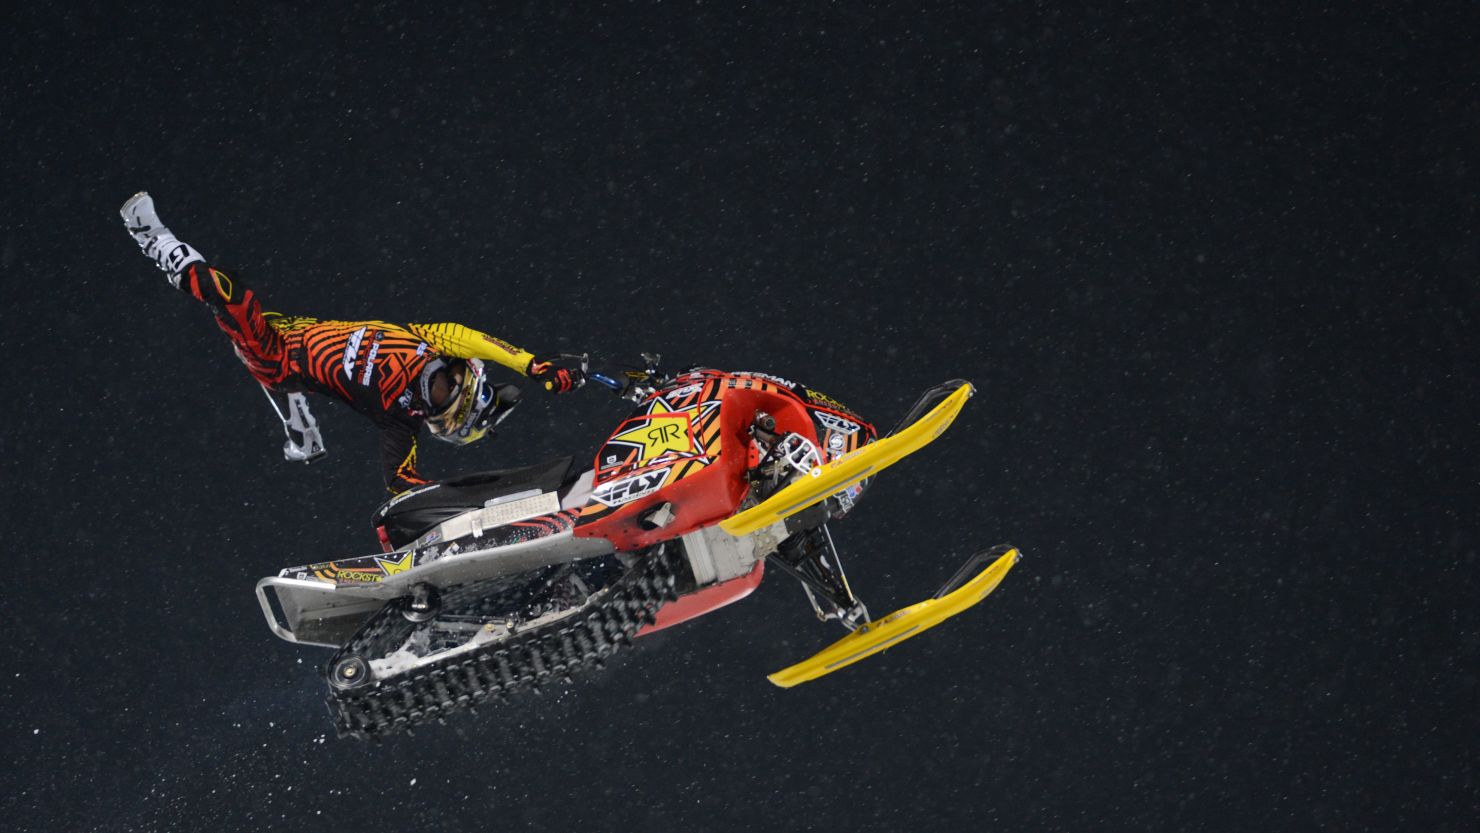 A photo of Caleb Moore's performance in the Snowmobile Freestyle Final during X Games Aspen 2013.